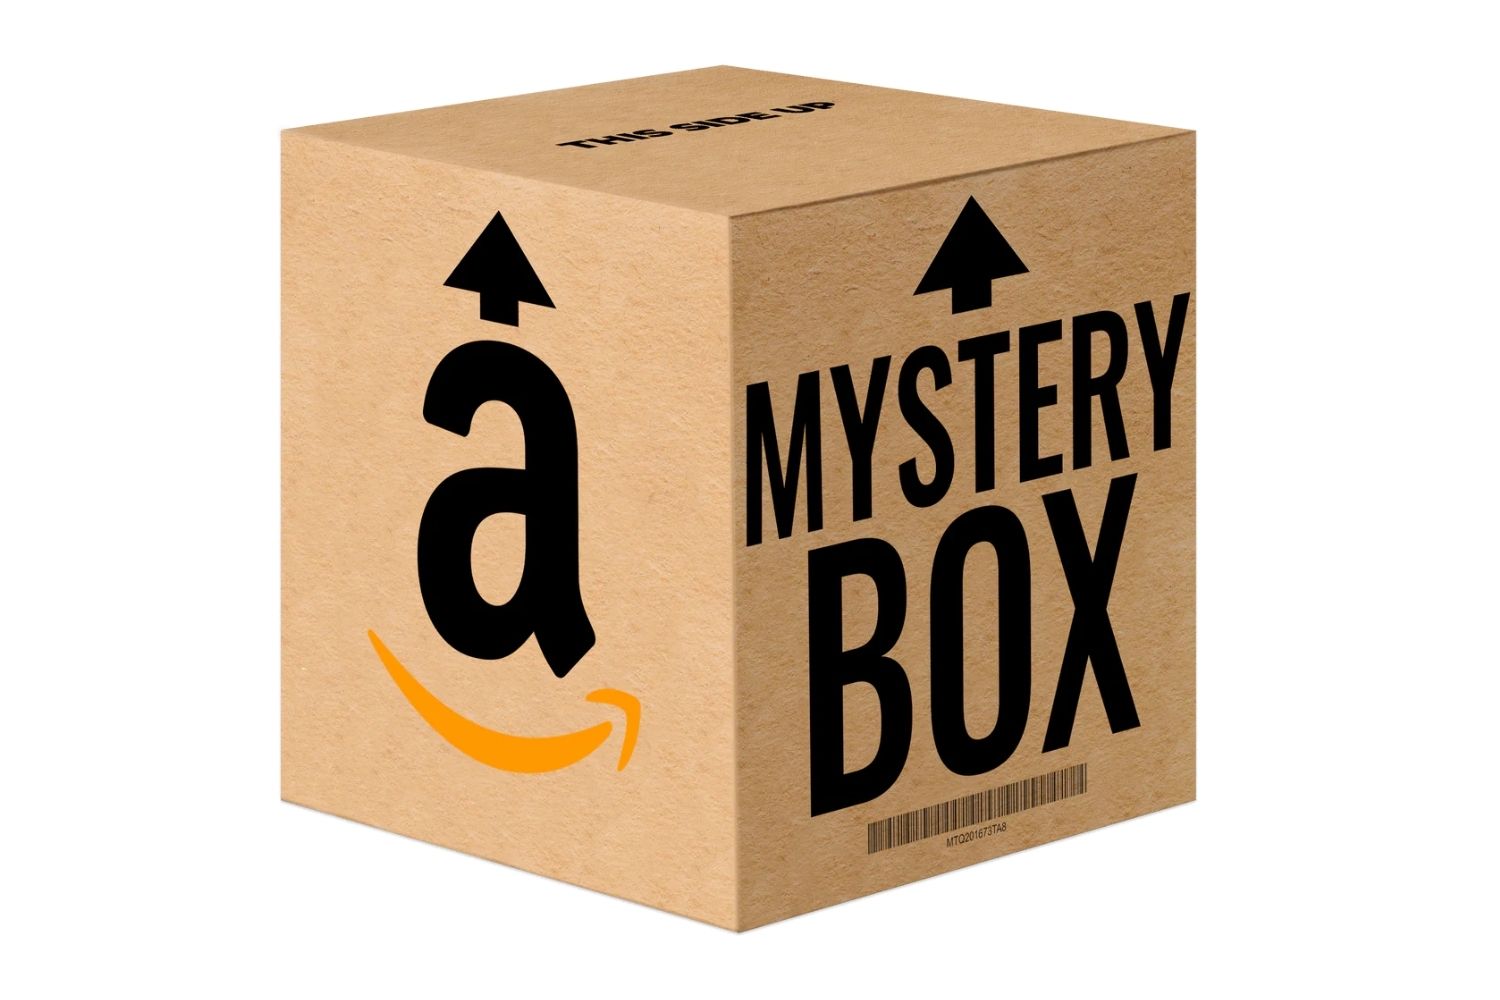 14-mind-blowing-facts-about-amazon-mystery-box